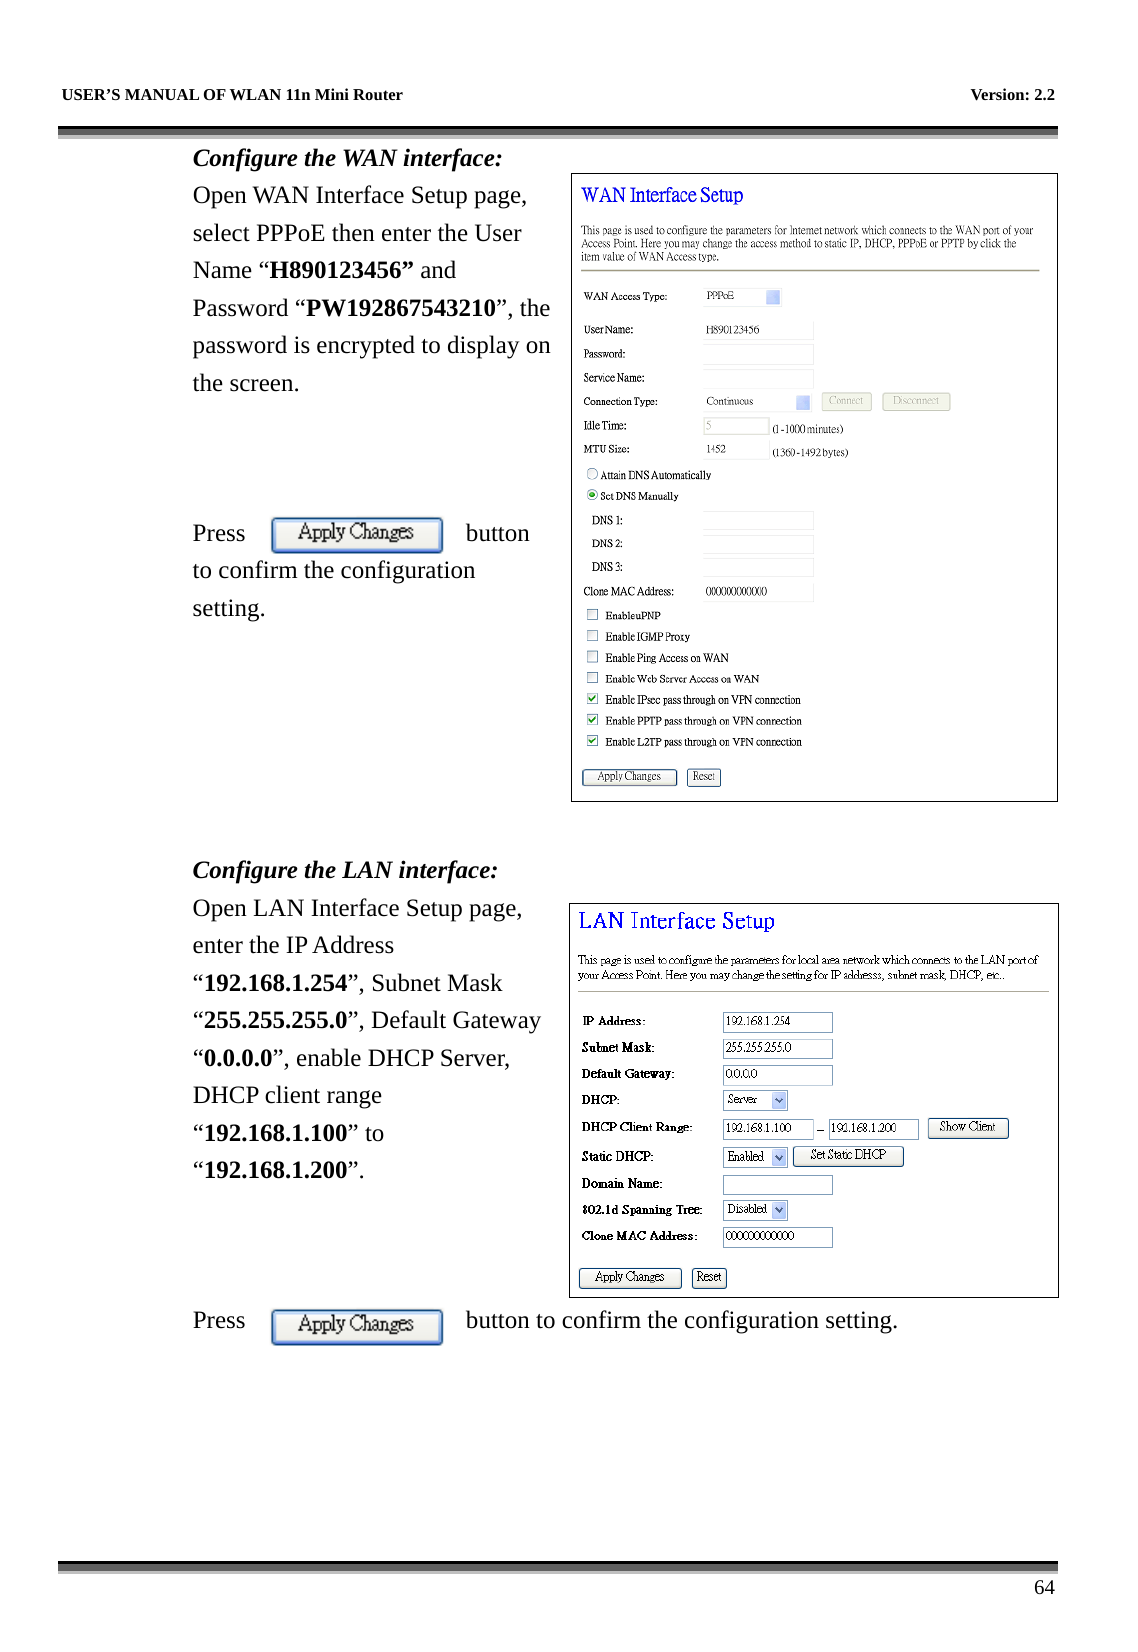   USER’S MANUAL OF WLAN 11n Mini Router    Version: 2.2      64 Configure the WAN interface: Open WAN Interface Setup page, select PPPoE then enter the User Name “H890123456” and Password “PW192867543210”, the password is encrypted to display on the screen.      Press button to confirm the configuration setting.       Configure the LAN interface:  Open LAN Interface Setup page, enter the IP Address “192.168.1.254”, Subnet Mask “255.255.255.0”, Default Gateway “0.0.0.0”, enable DHCP Server, DHCP client range “192.168.1.100” to “192.168.1.200”.     Press  button to confirm the configuration setting.   